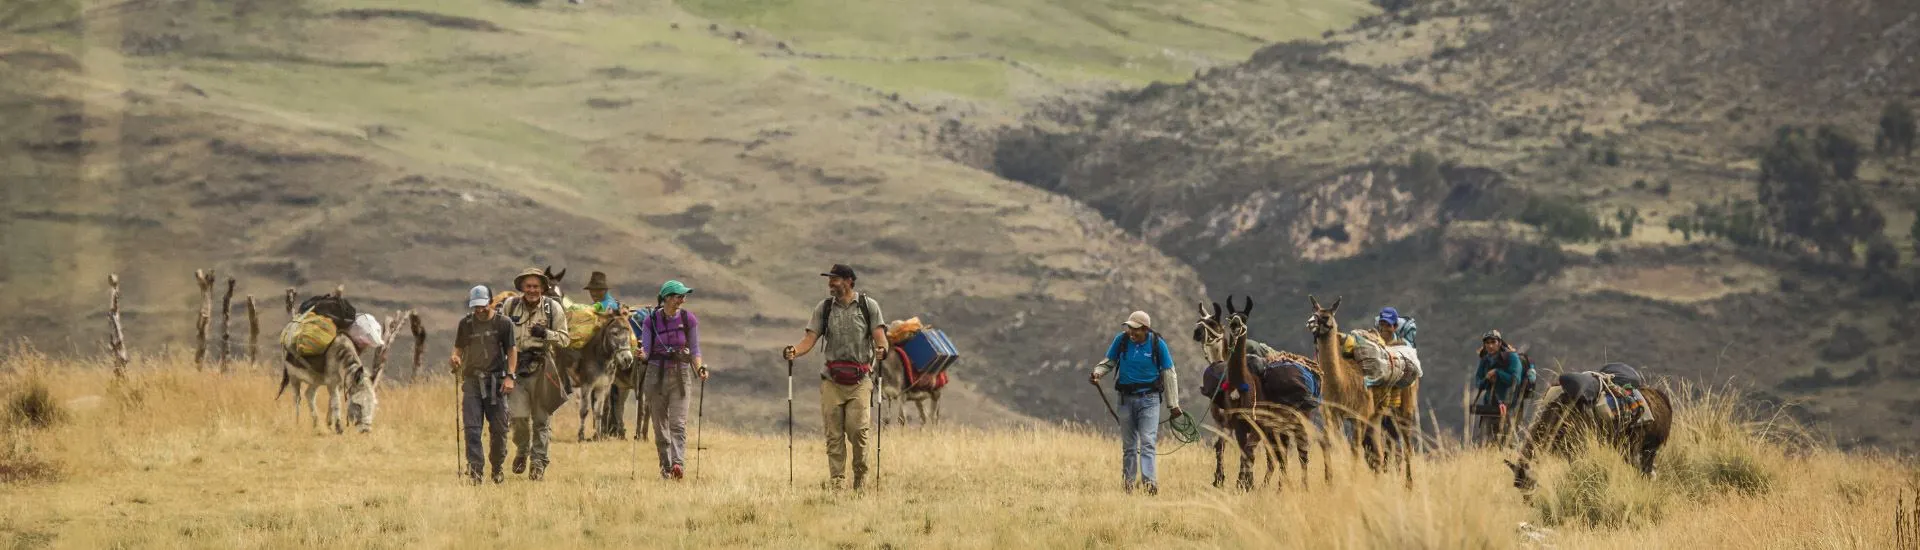 Tourists and animals hiking the Inca Trail